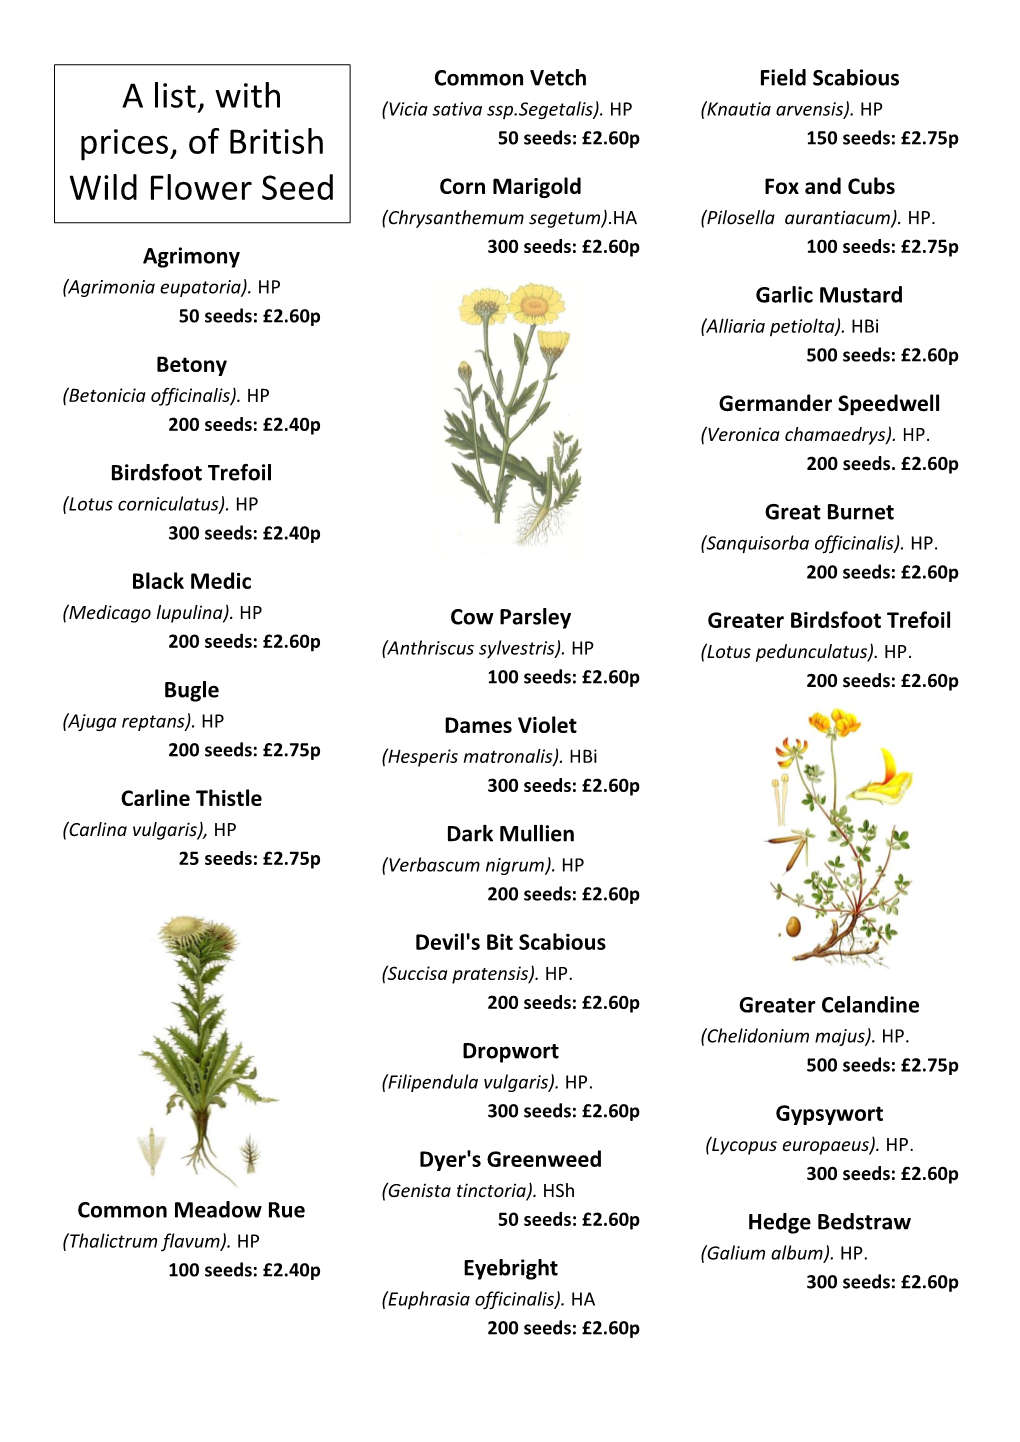 A List, with Prices, of British Wild Flower Seed